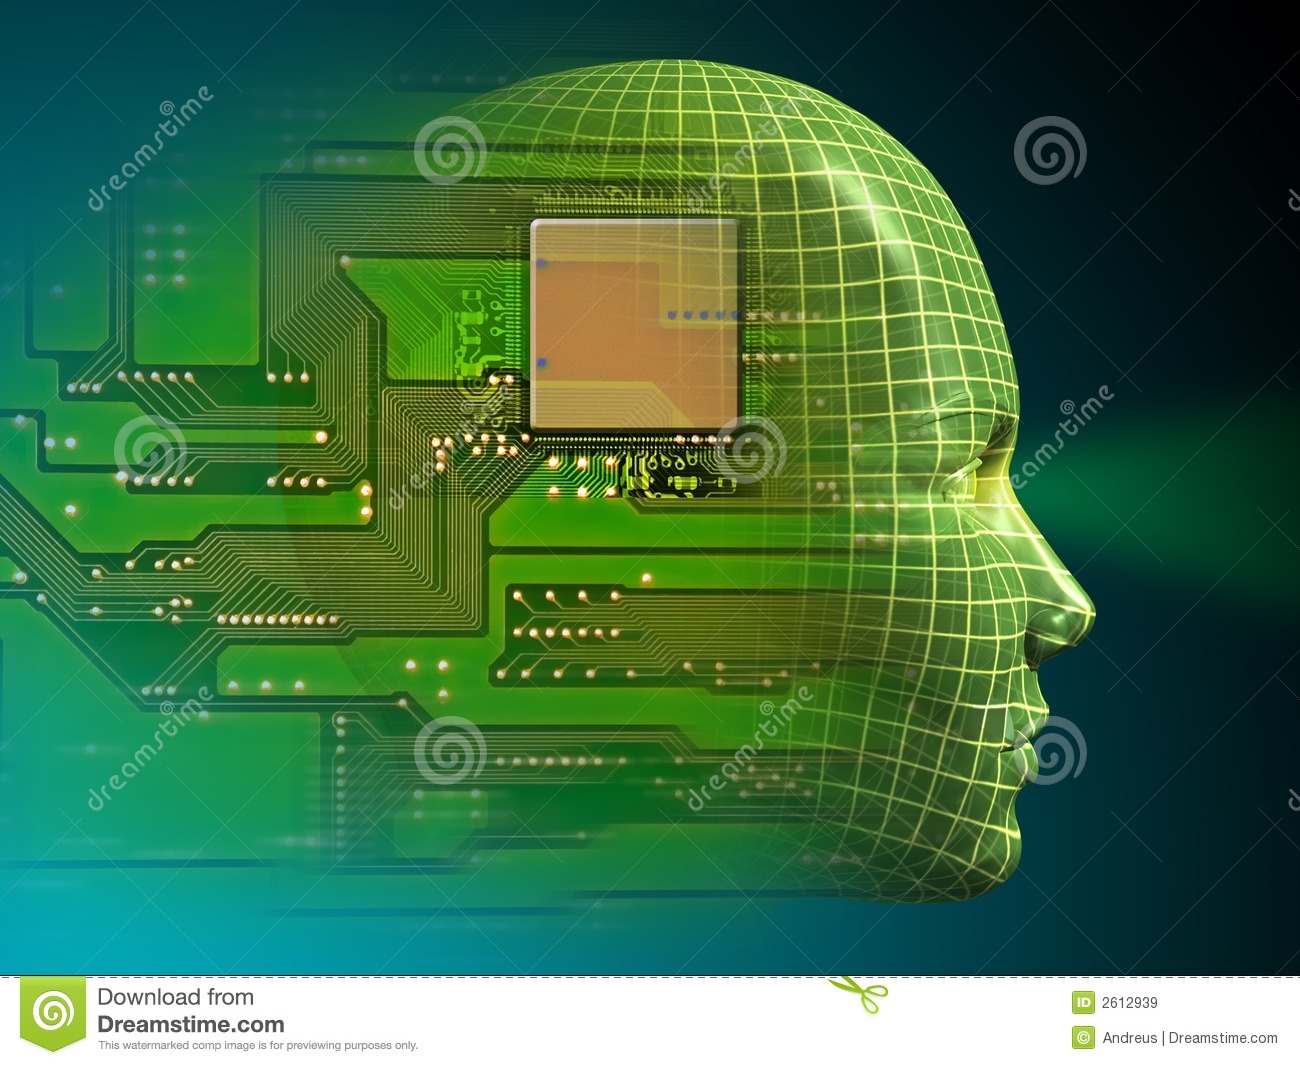 Artificial intelligence ppt download free